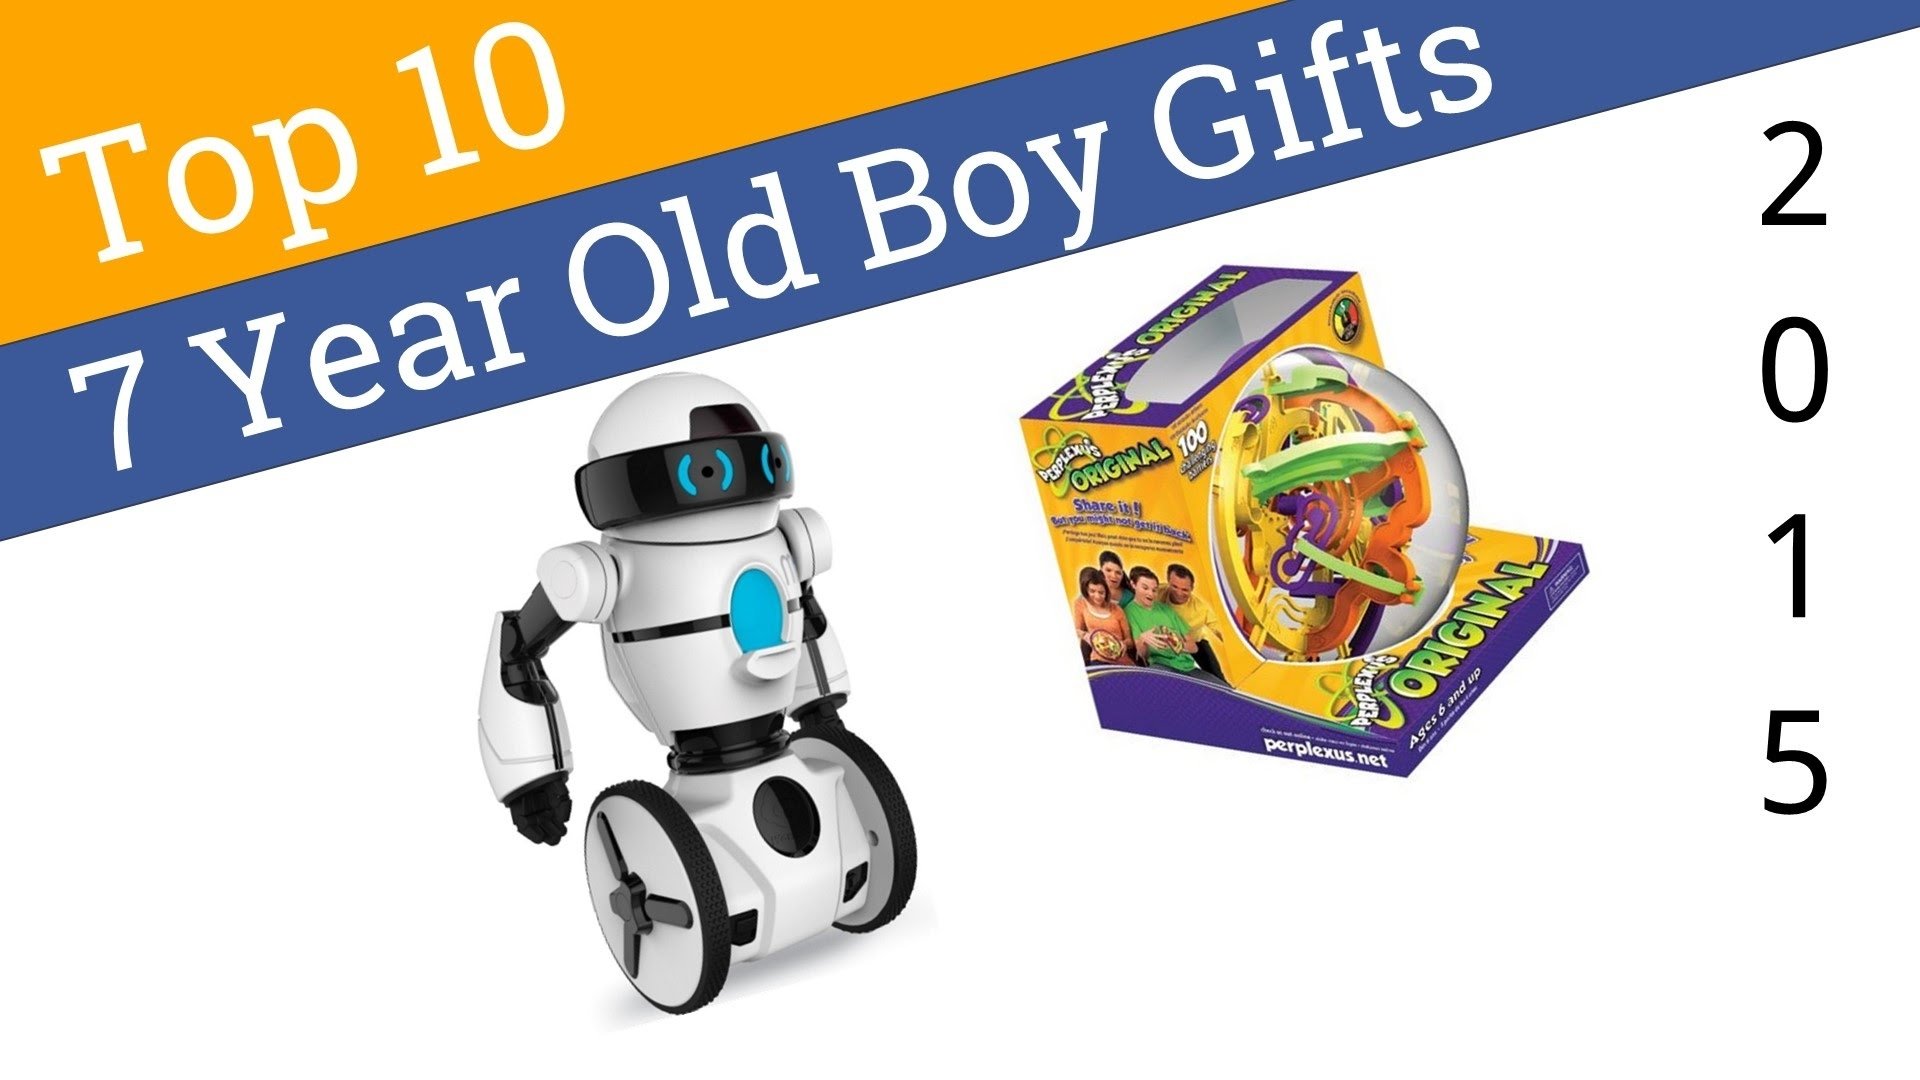 10 Awesome Gift Ideas For 7 Year Old Boys 10 best 7 year old boy gifts 2015 youtube 13 2022